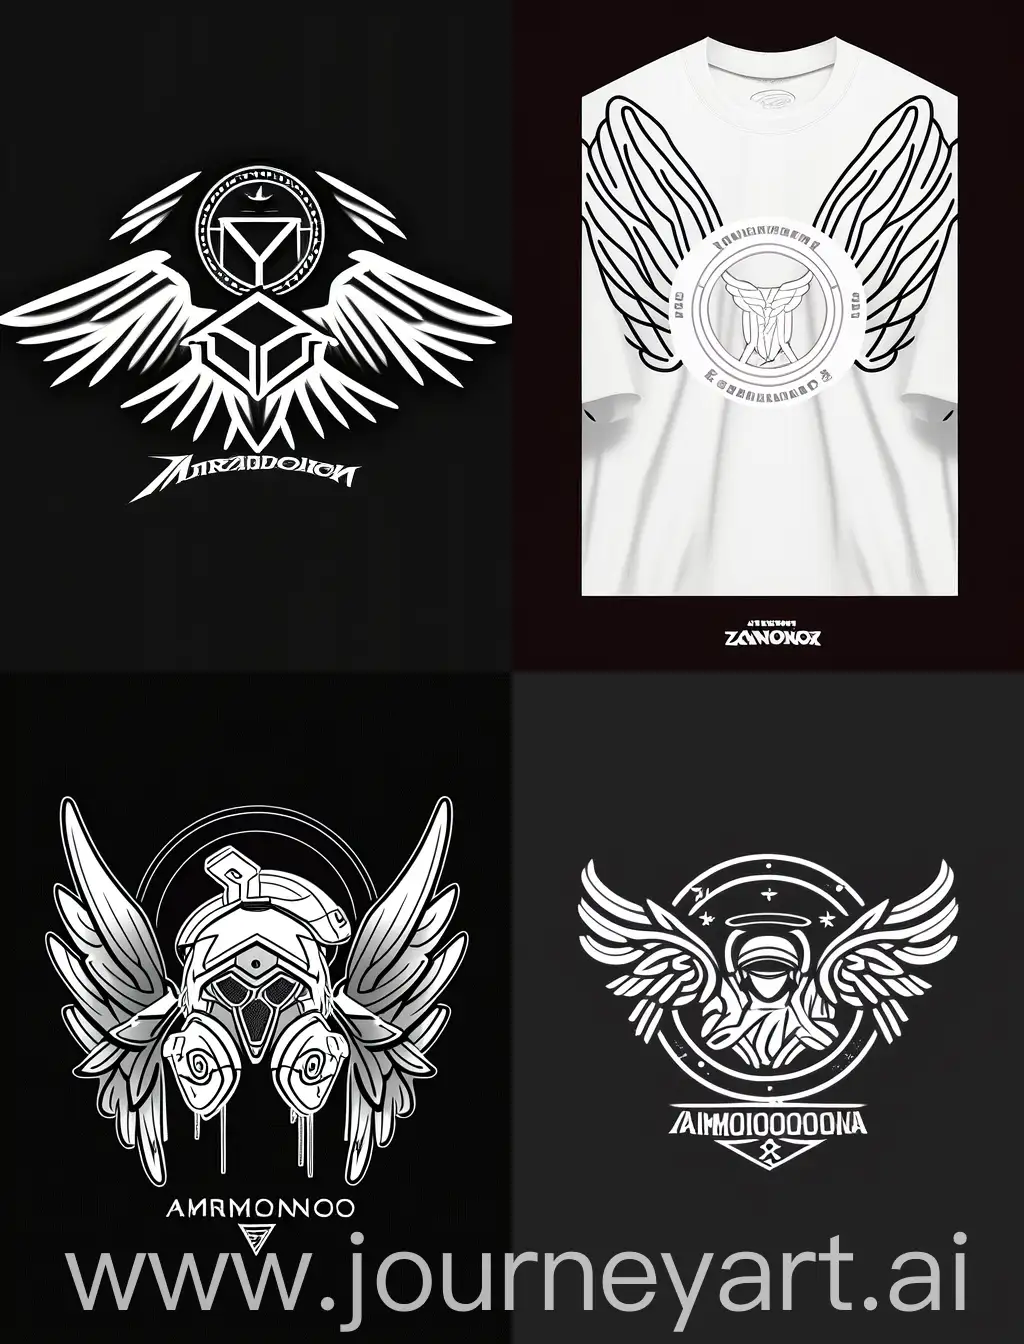 a white logo design for a streetwear brand called "AMZONBOY" about mythology and angels 